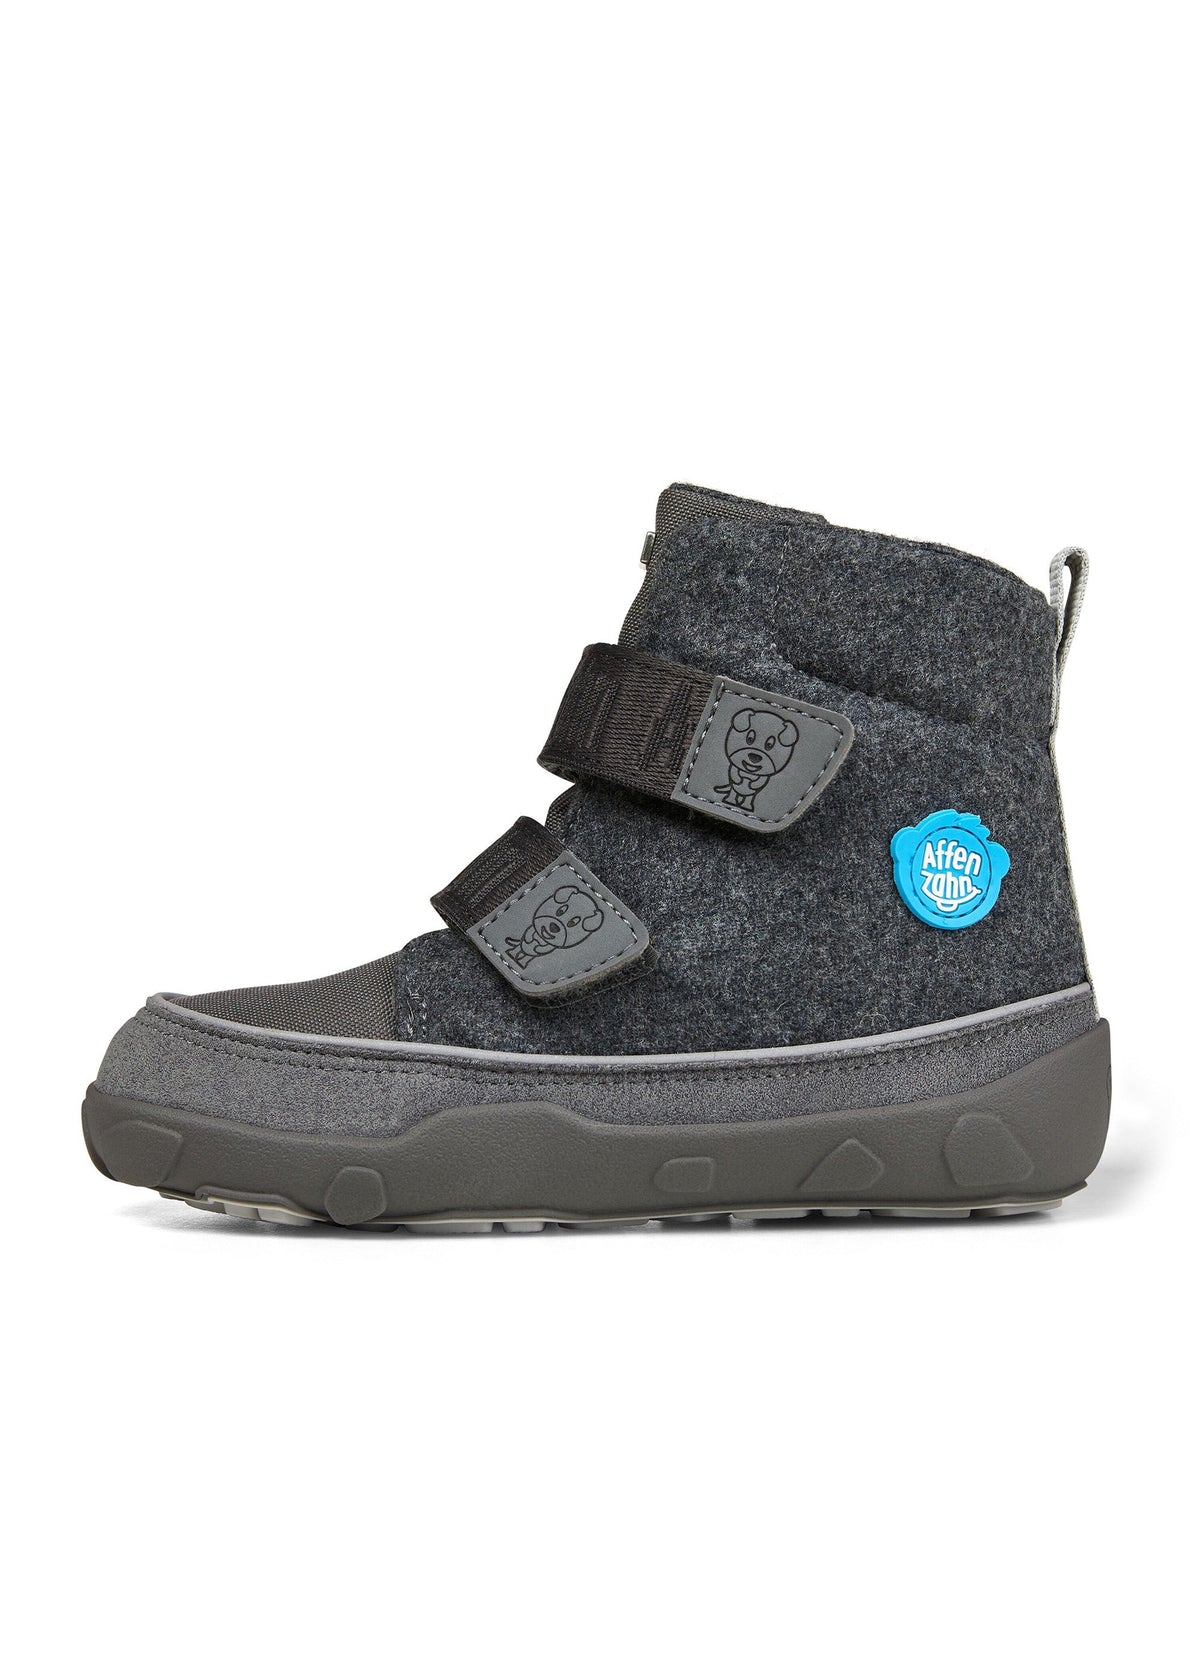 Children's barefoot shoes - Wool Comfy Dog, winter shoes with TEX membrane - dark gray, wool